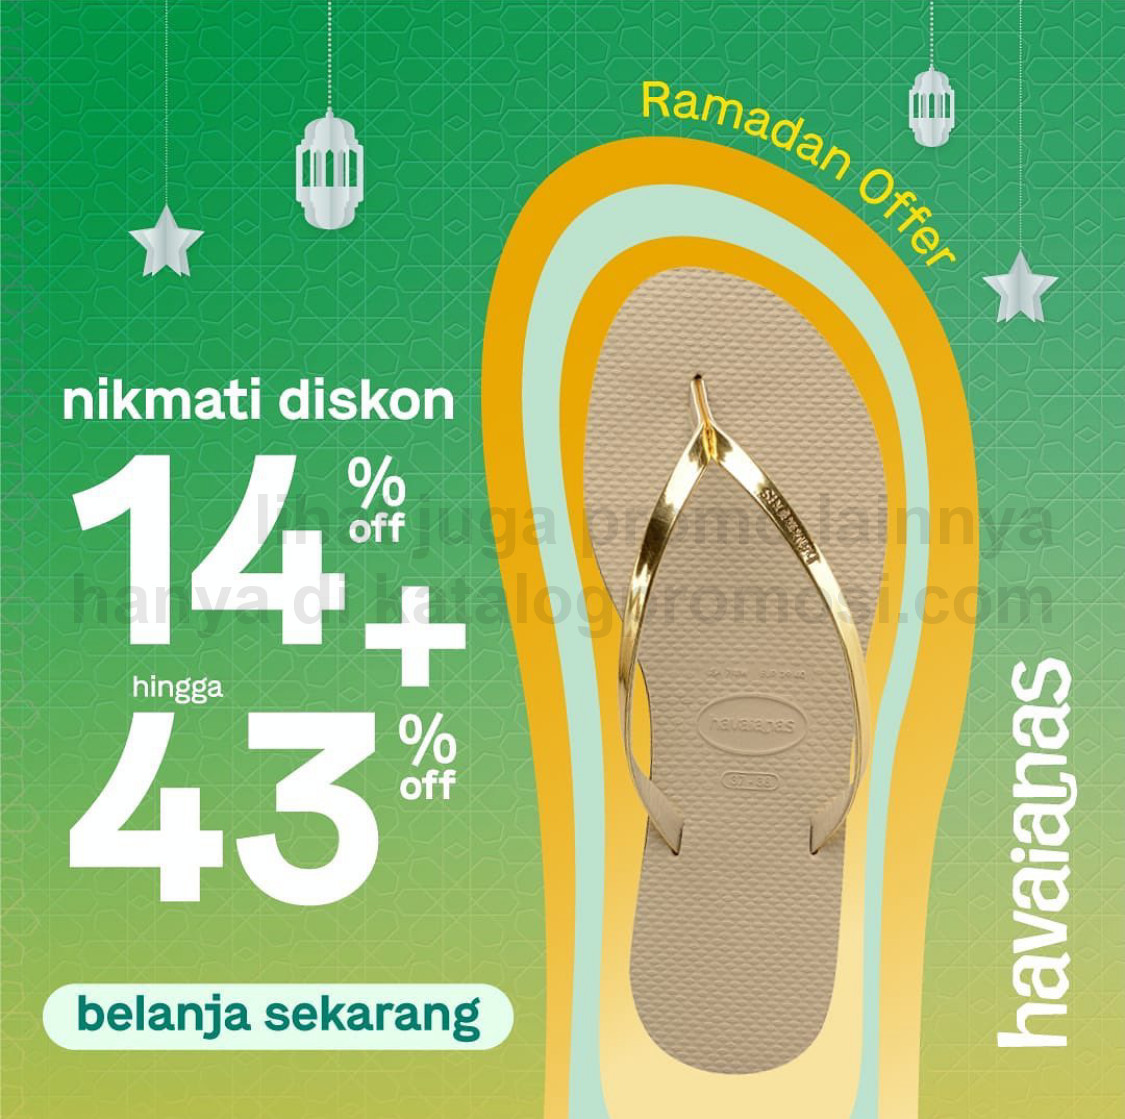 Promo HAVAIANAS RAMADAN OFFER - DISCOUNT 14% off + up to 43% off